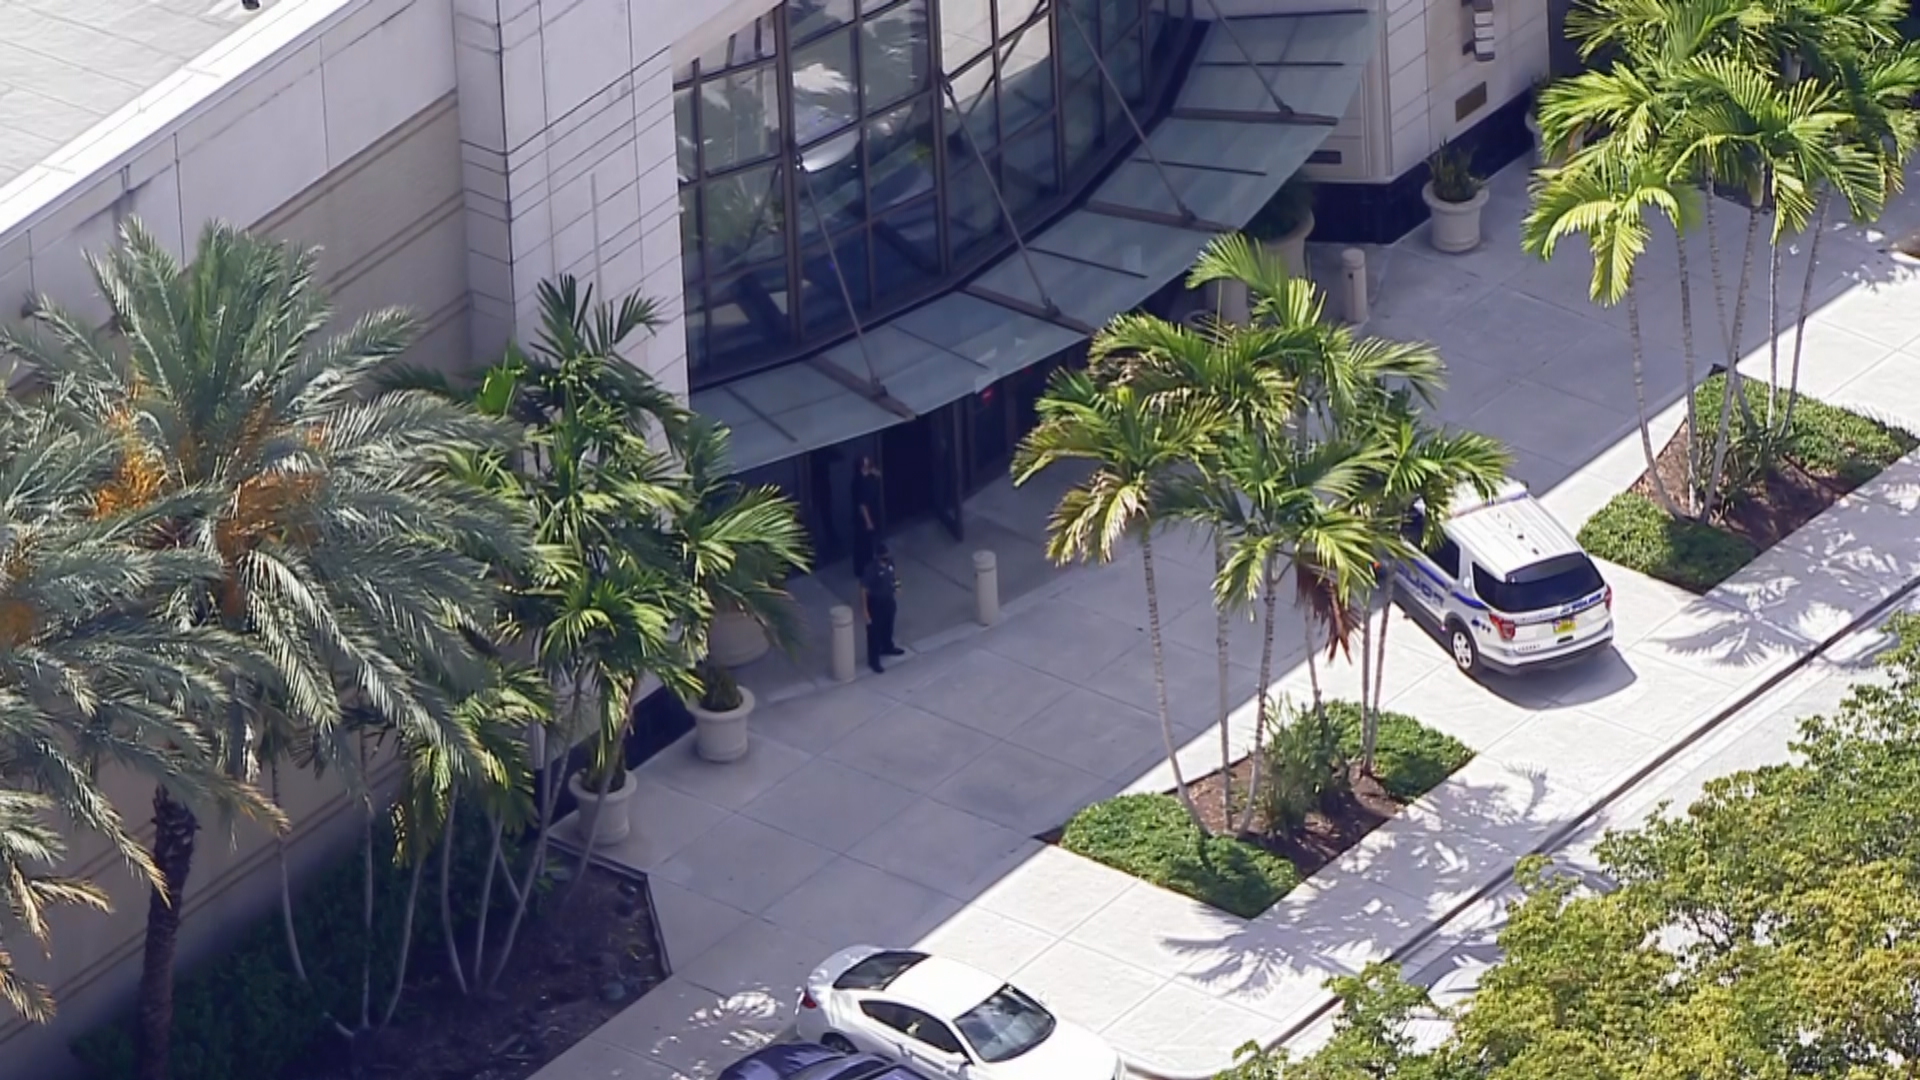 Police: 2 in custody, 2 hospitalized after shooting at Aventura Mall